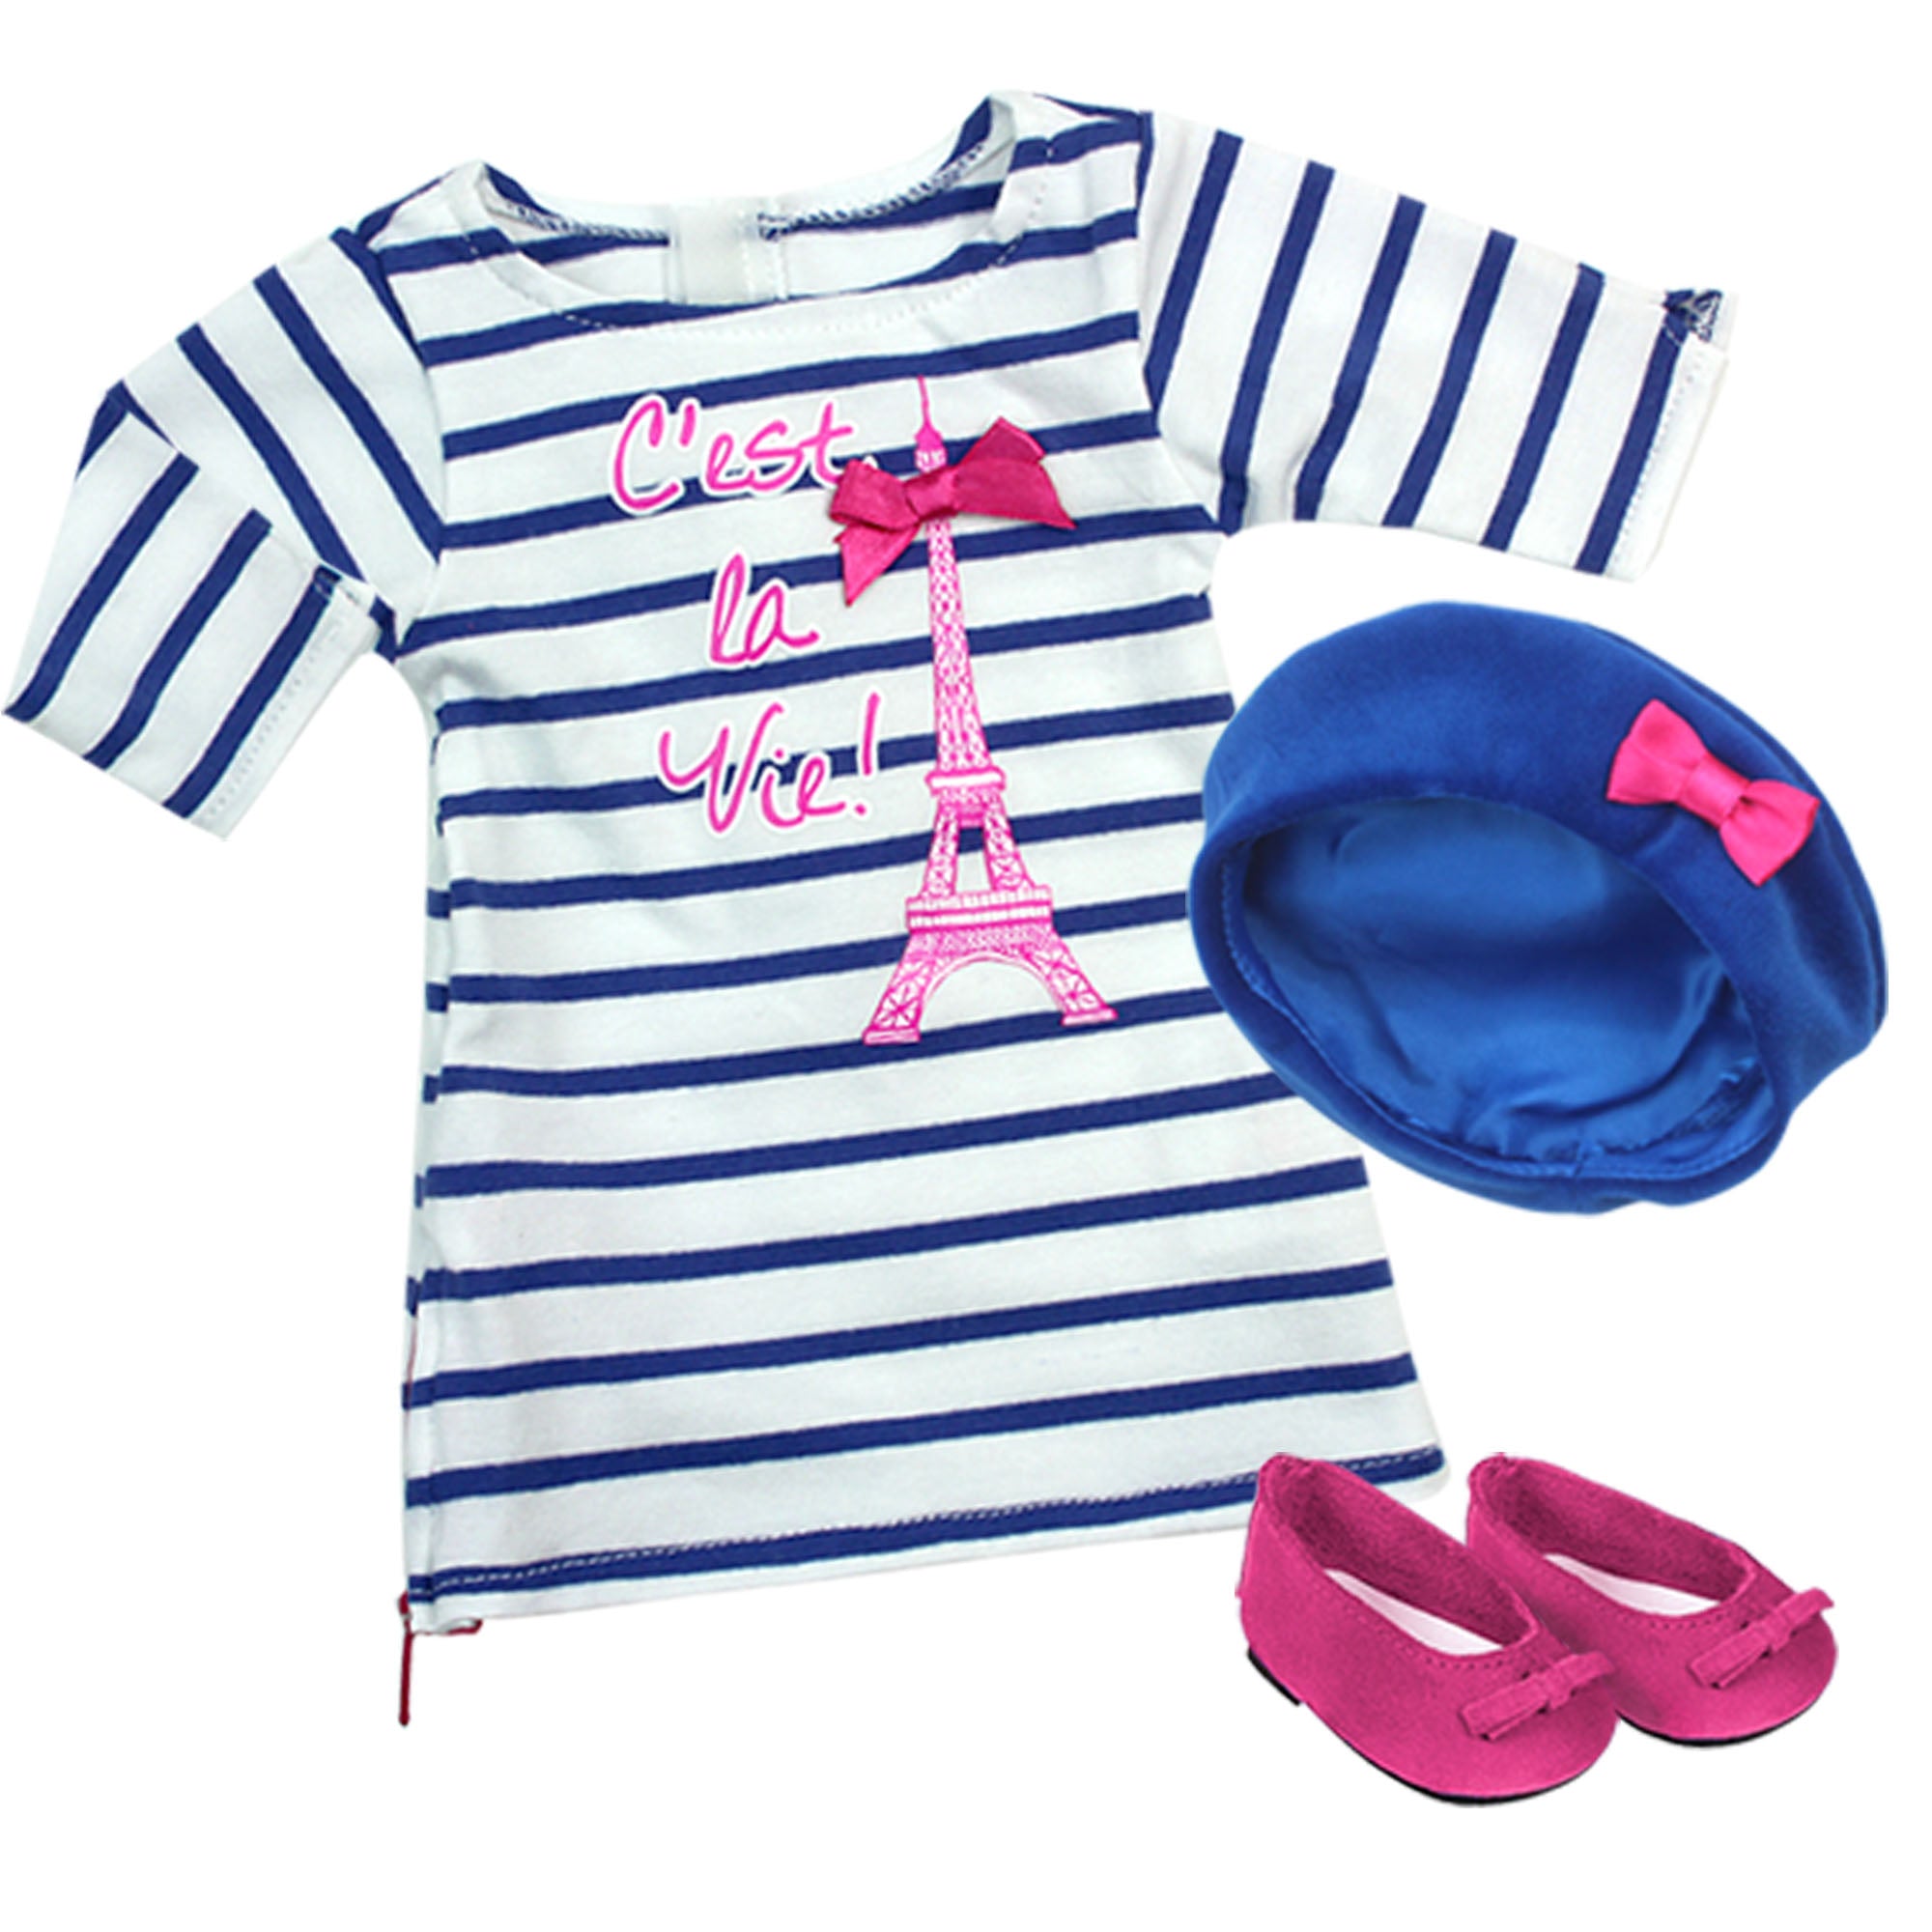 Sophia's 3 Piece Parisian Outfit with Eiffel Tower Dress, Beret Cap and Flats for 18" Dolls, Blue/Pink